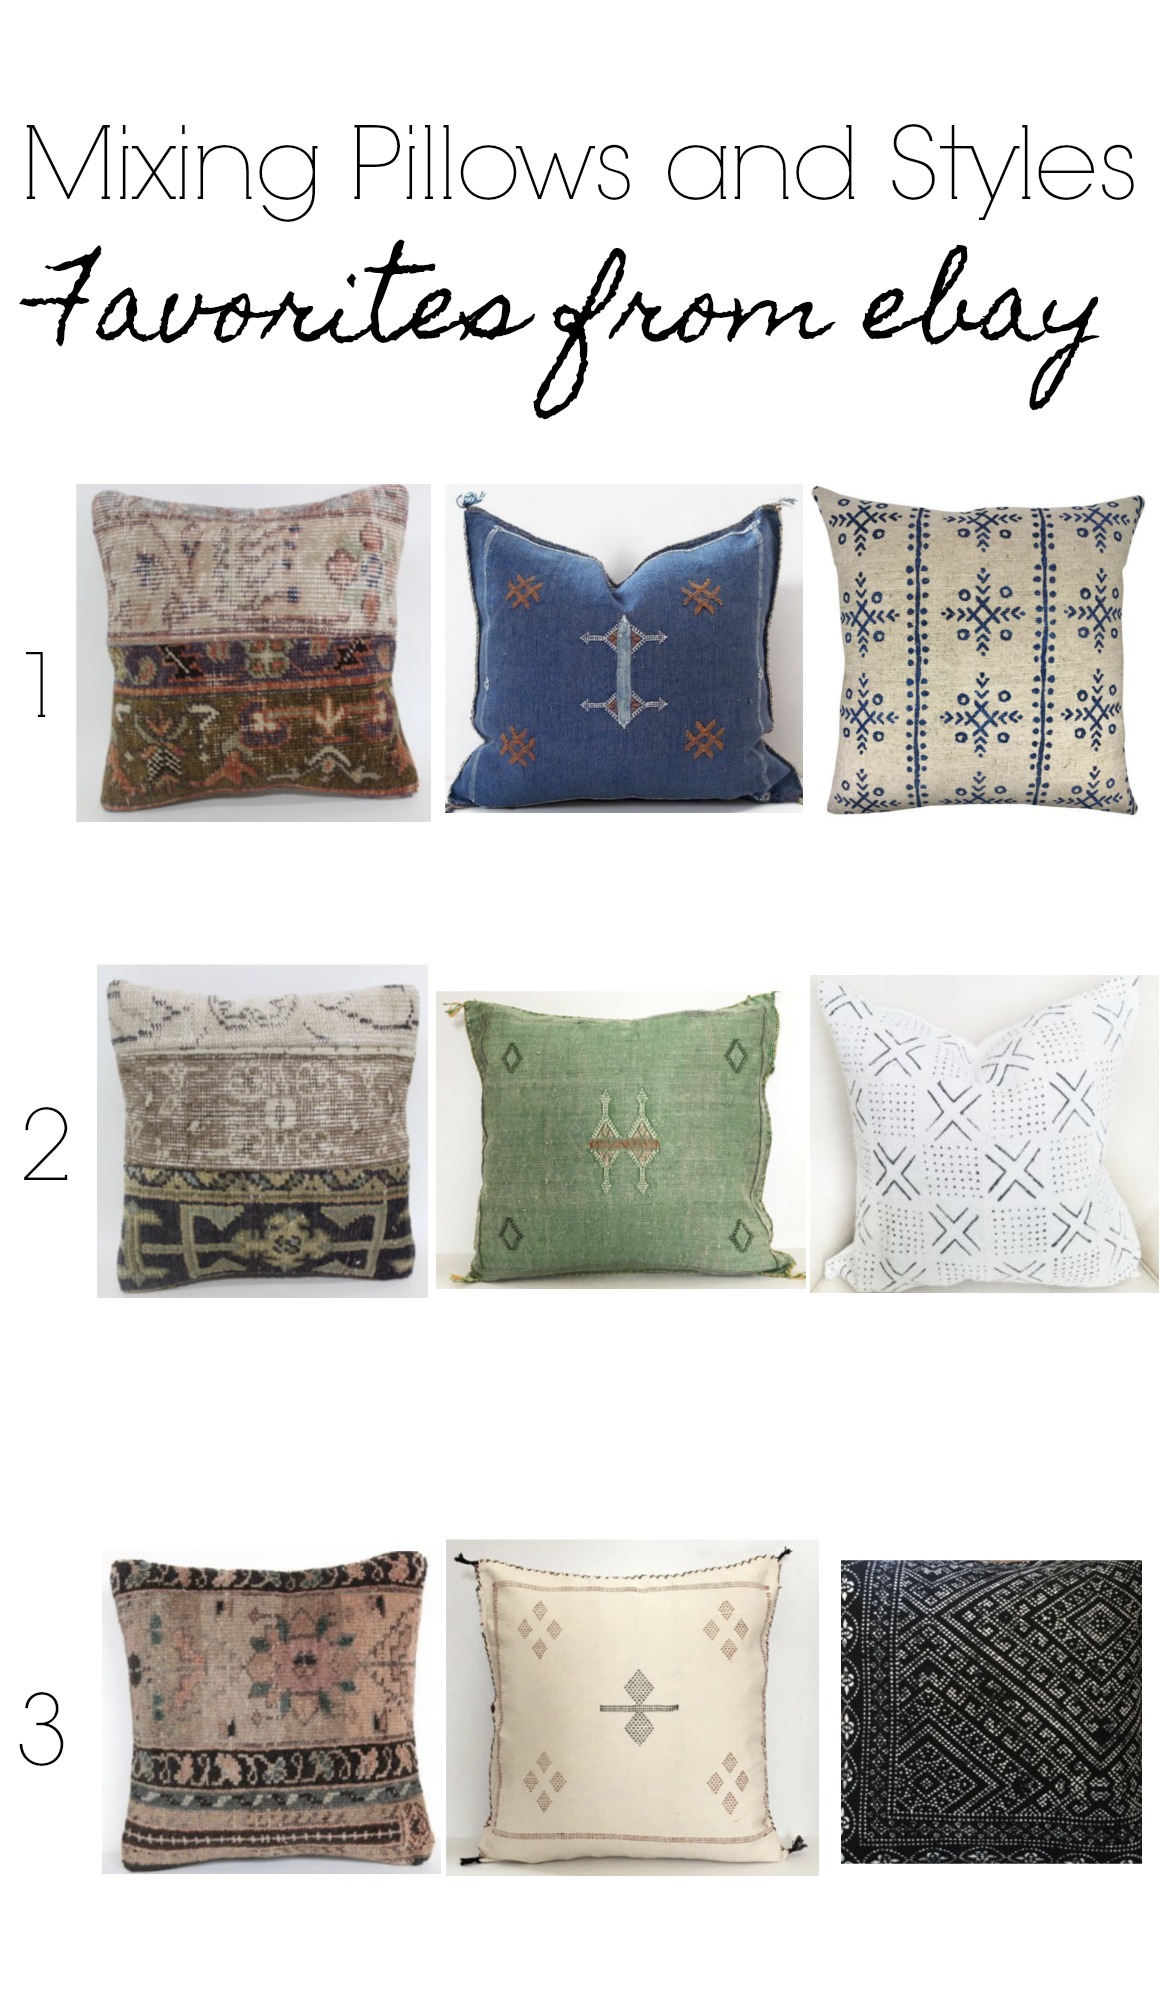 How to Mix Pillows and Styles